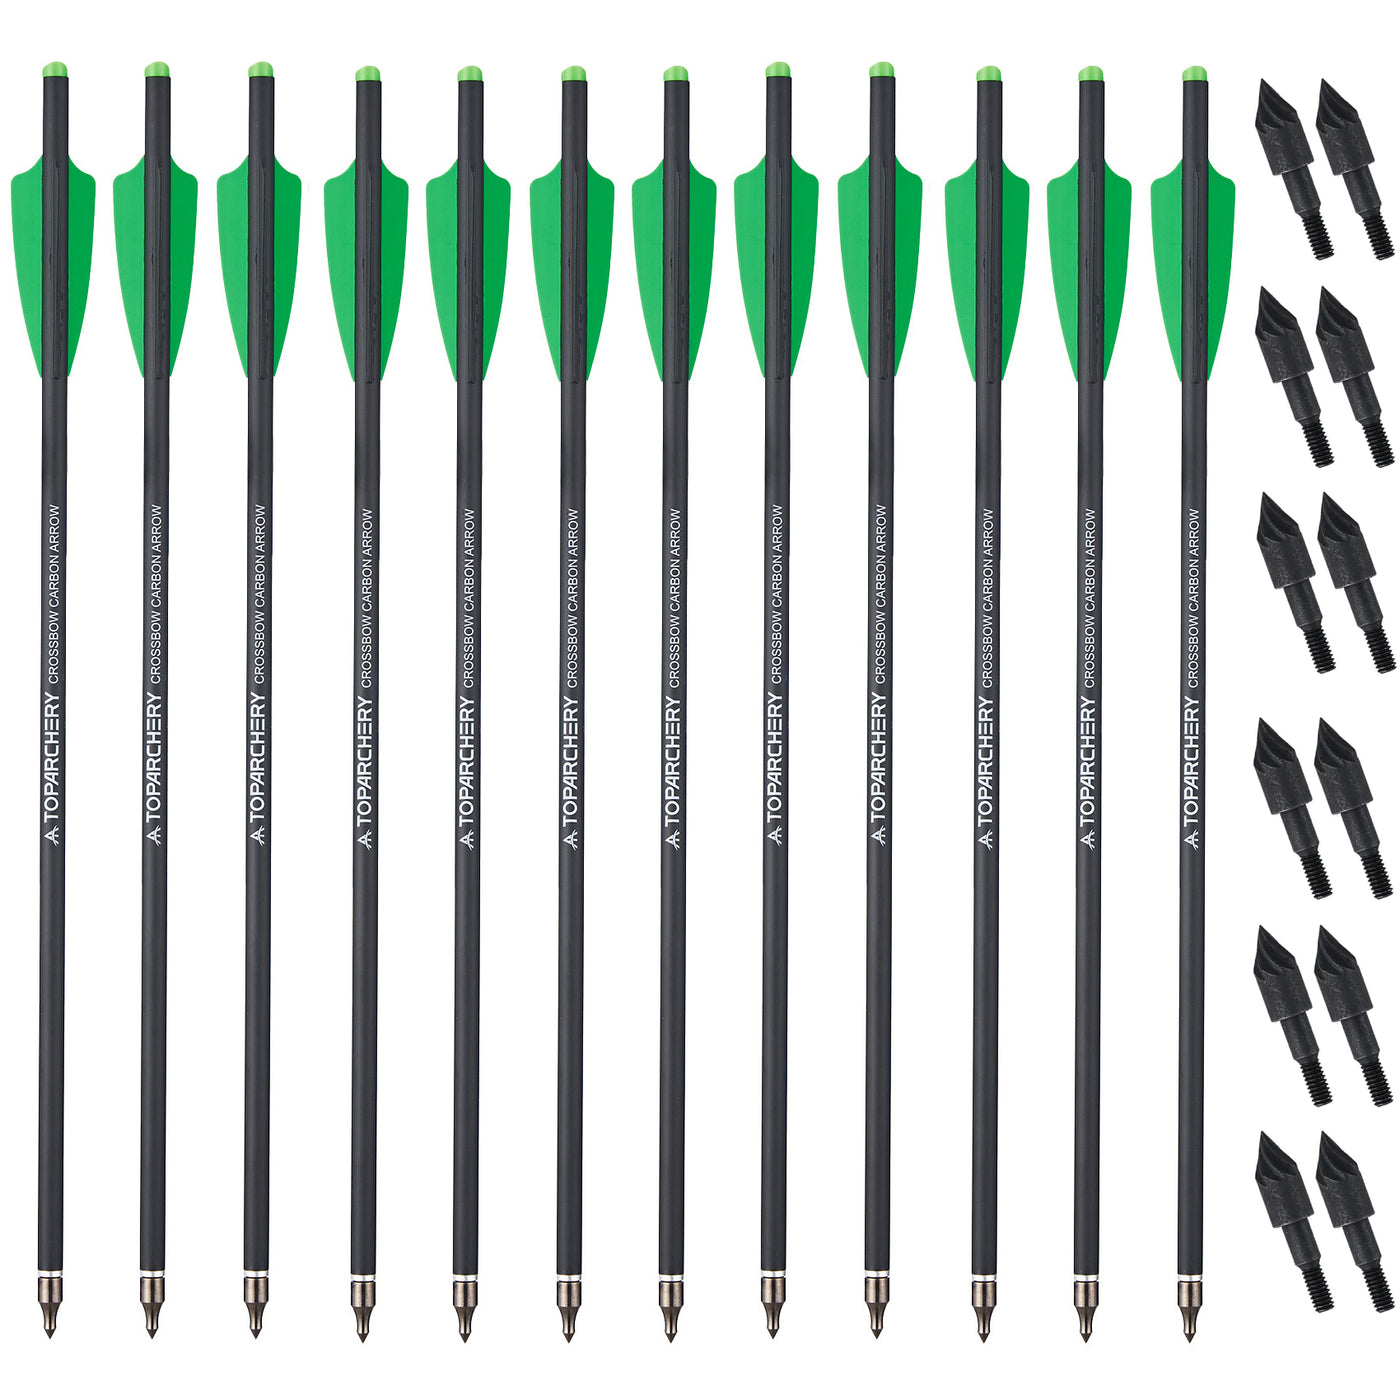 12x 16" Carbon Crossbow Bolts Archery Arrows with 12x Carbon Steel Spiral Arrowheads For Hunting Practice